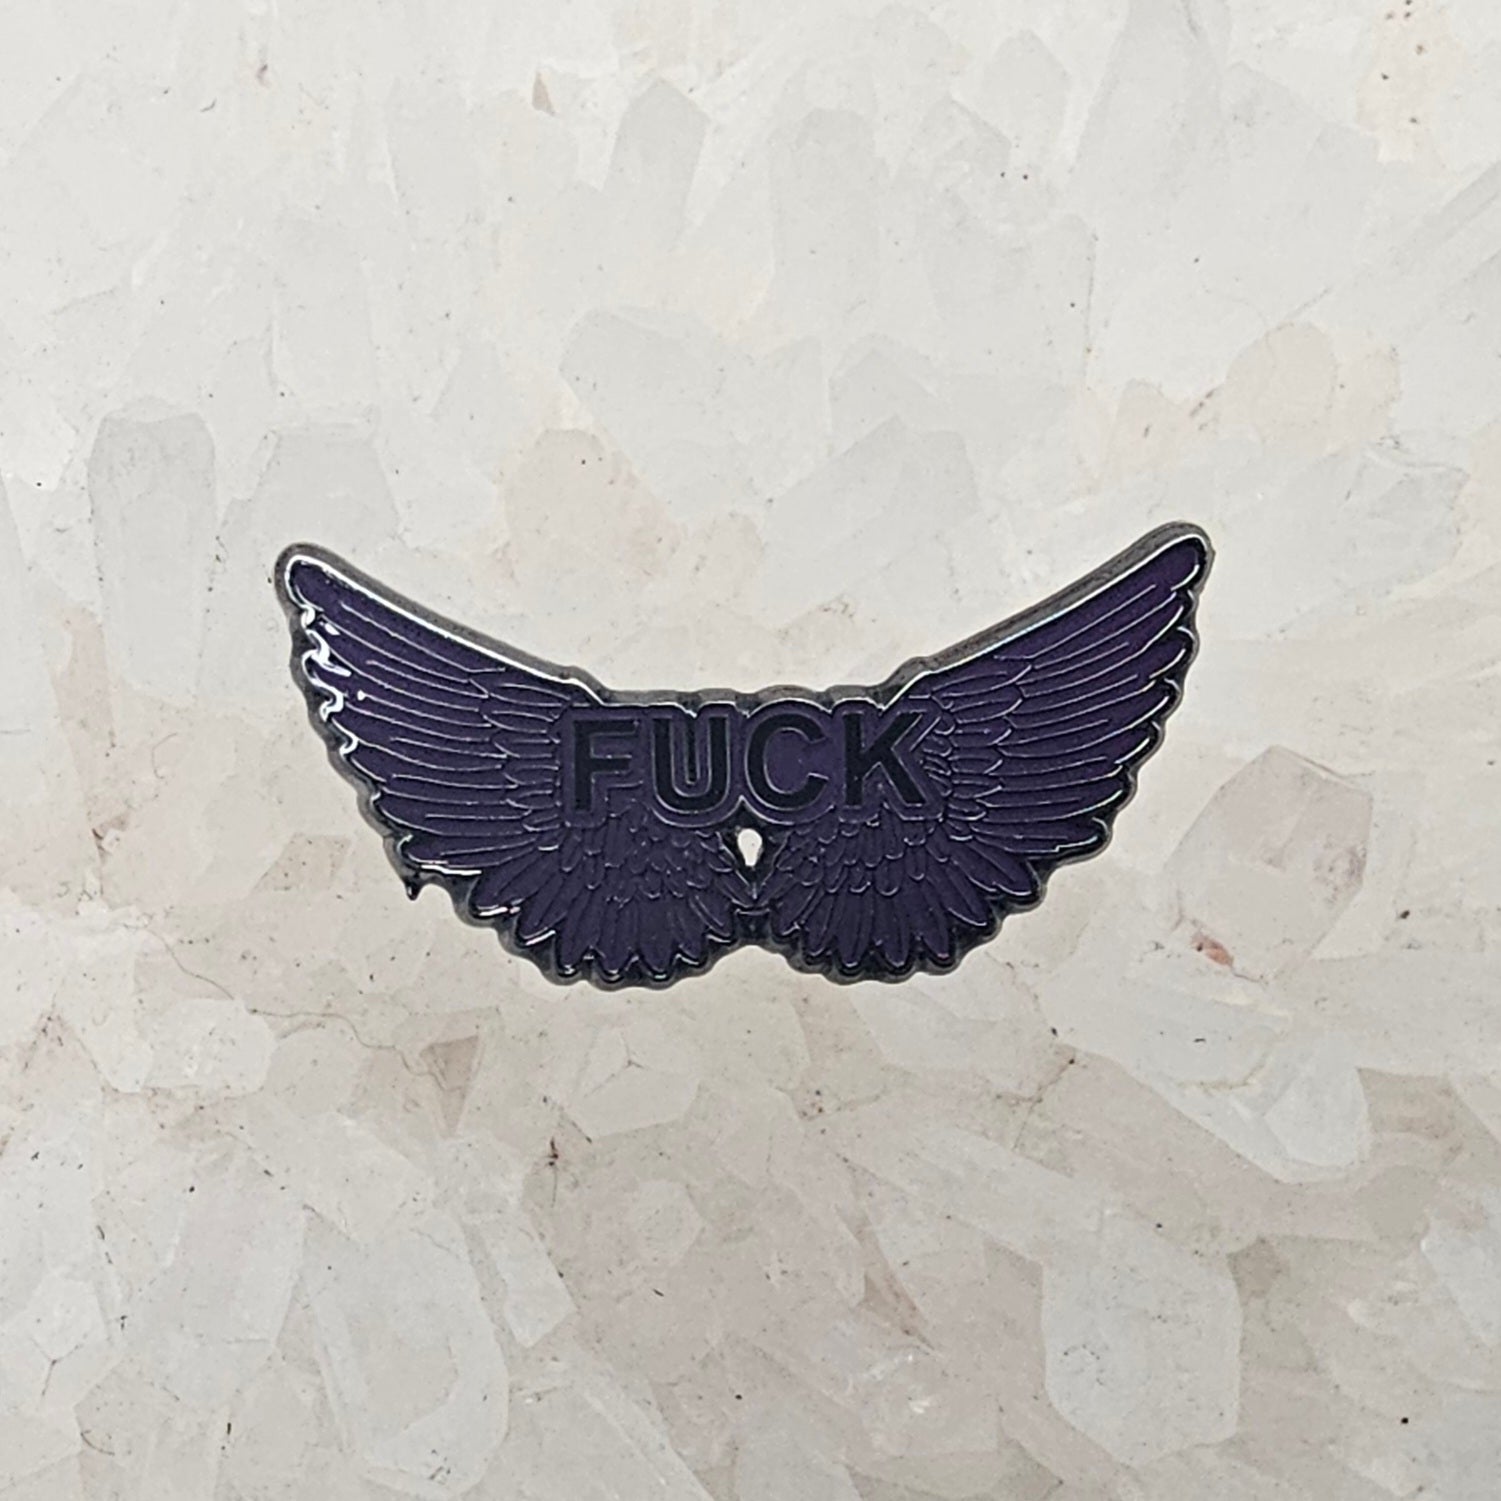 Dont Give A Flying Fuck Wings Funny Comedy Dark Blue Enamel Pins Hat Pins Lapel Pin Brooch Badge Festival Pin